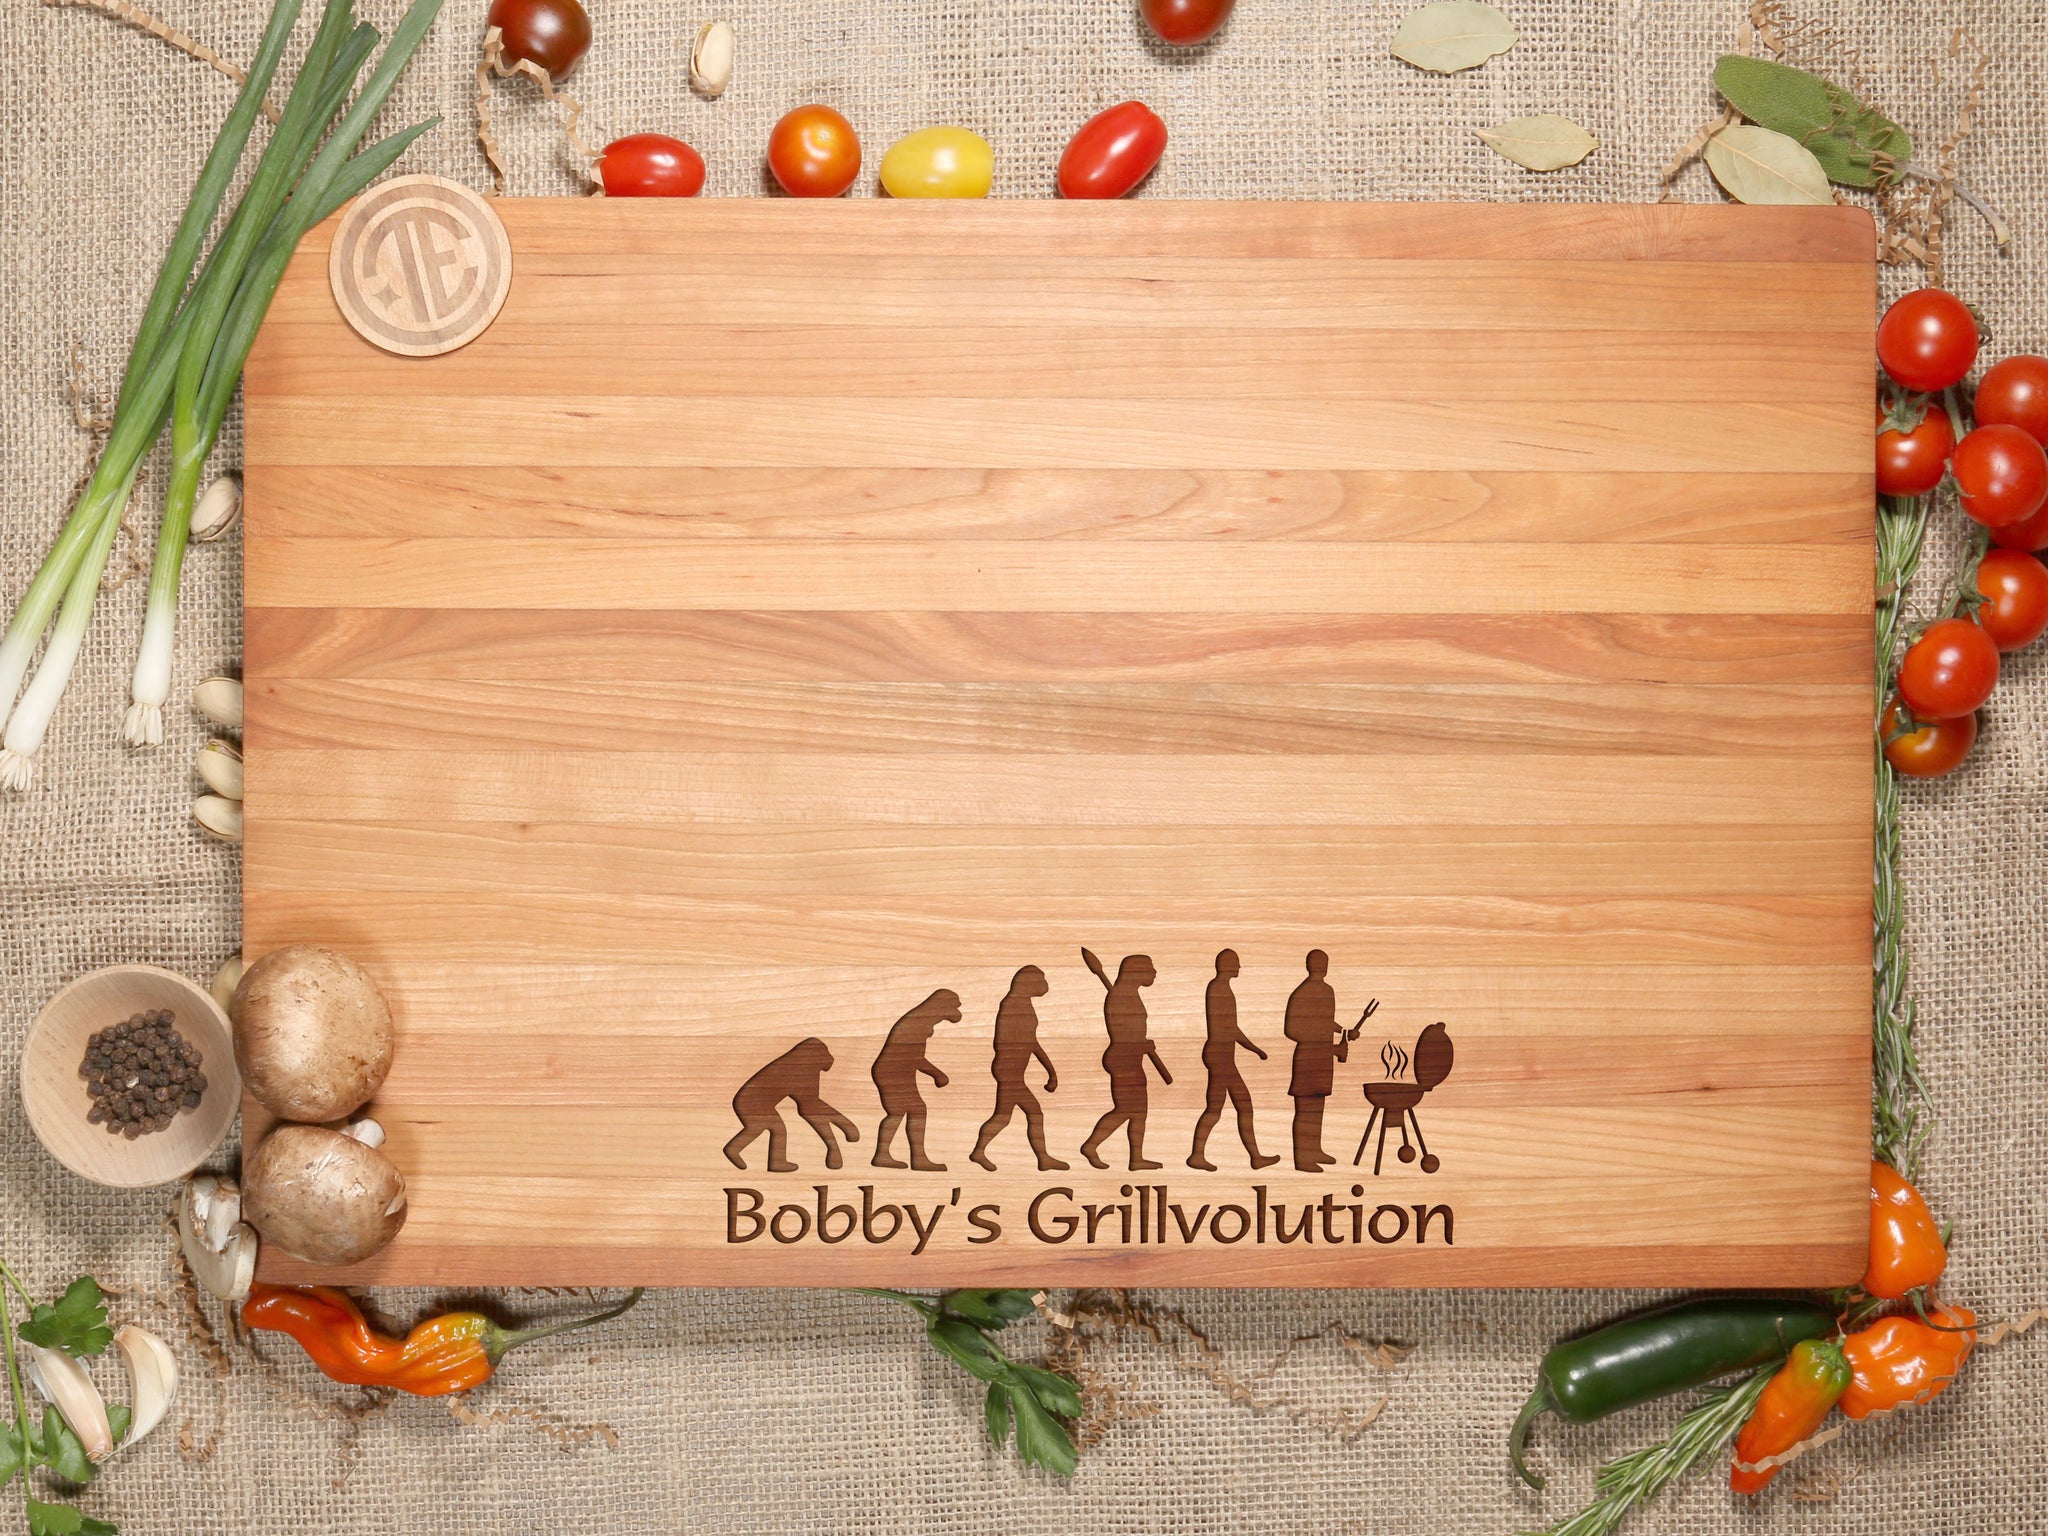 Master of The Grill Personalized Maple Cutting Board